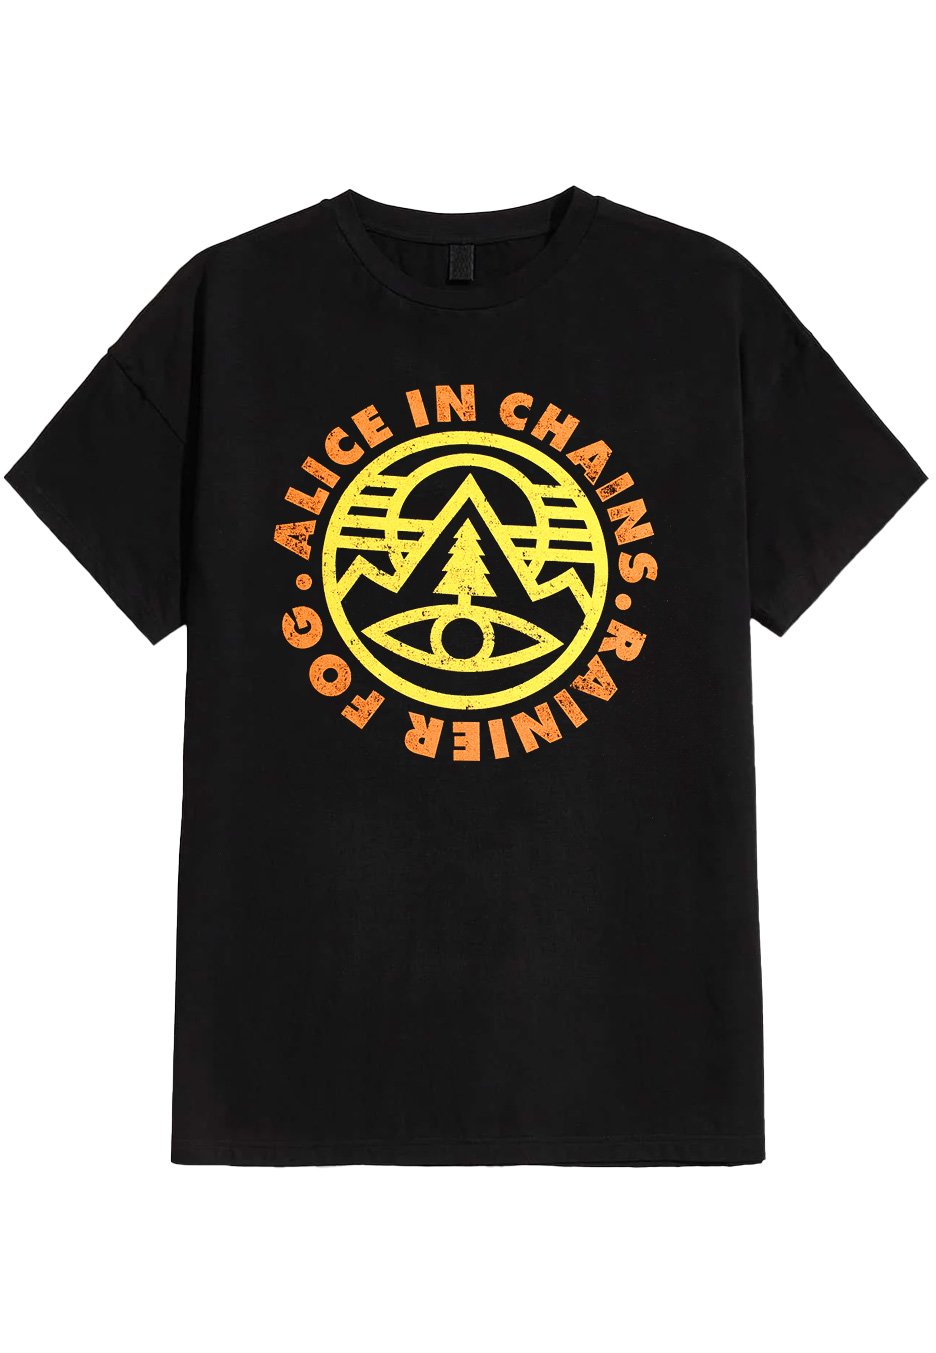 Alice In Chains - Pine Emblem - T-Shirt